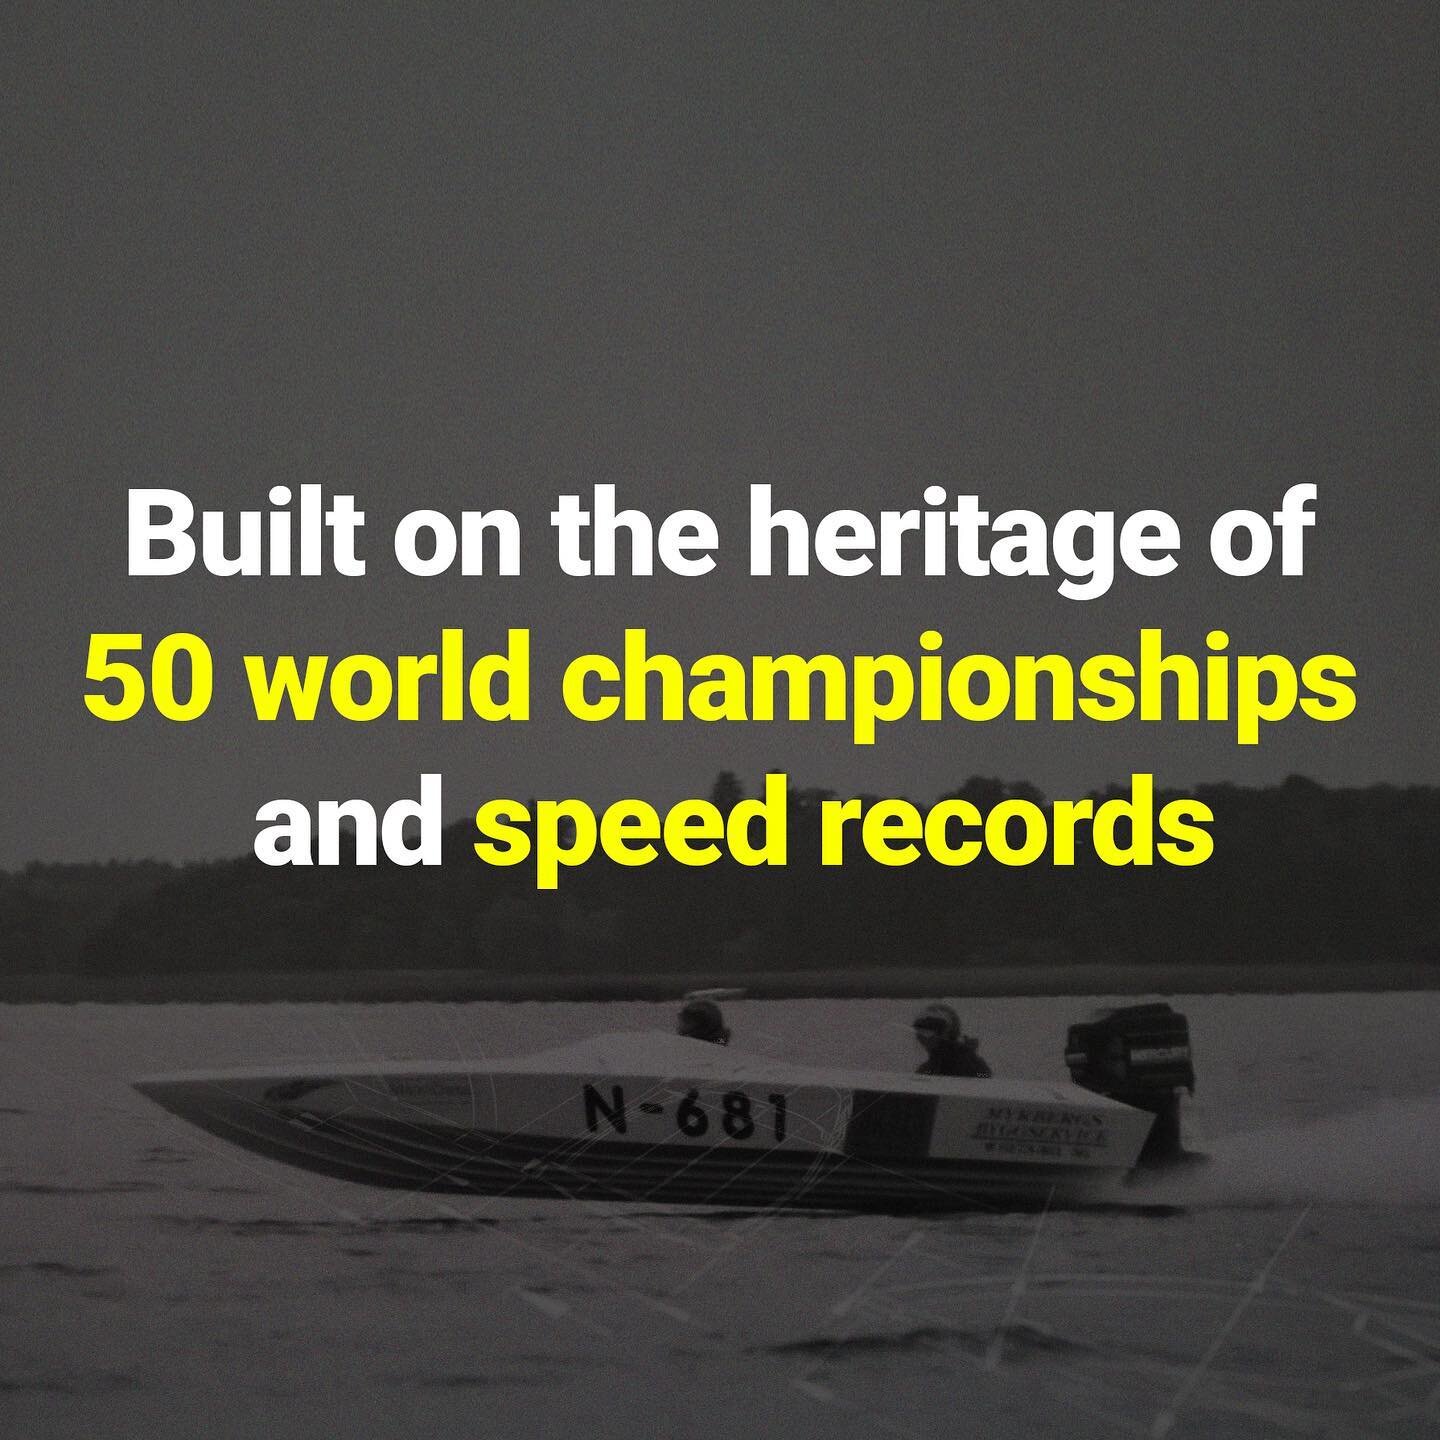 Built on the heritage of 50 world championships and speed records, Parexo&reg;️ combines the technology from the past with modern innovations to redefine the sports boating experience.

JOIN THE RIDE!

#Parexo #boating #saltlife #ocean #fun #speedboa